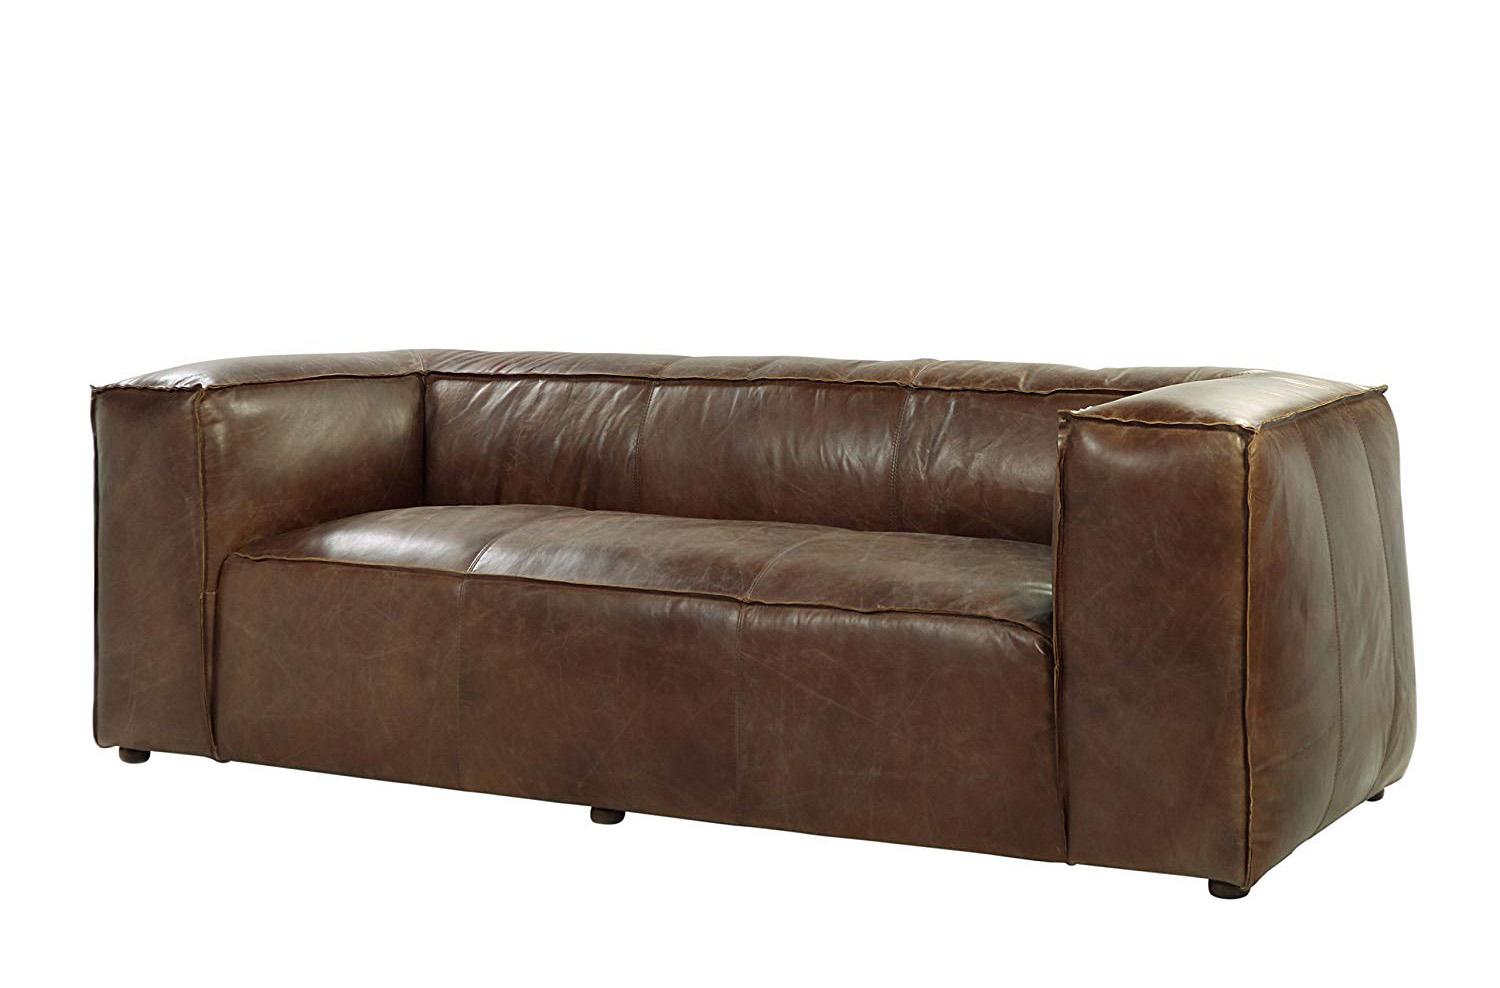 Casual, Transitional Sofa Brancaster-53545 53545 in Brown Geniune Leather